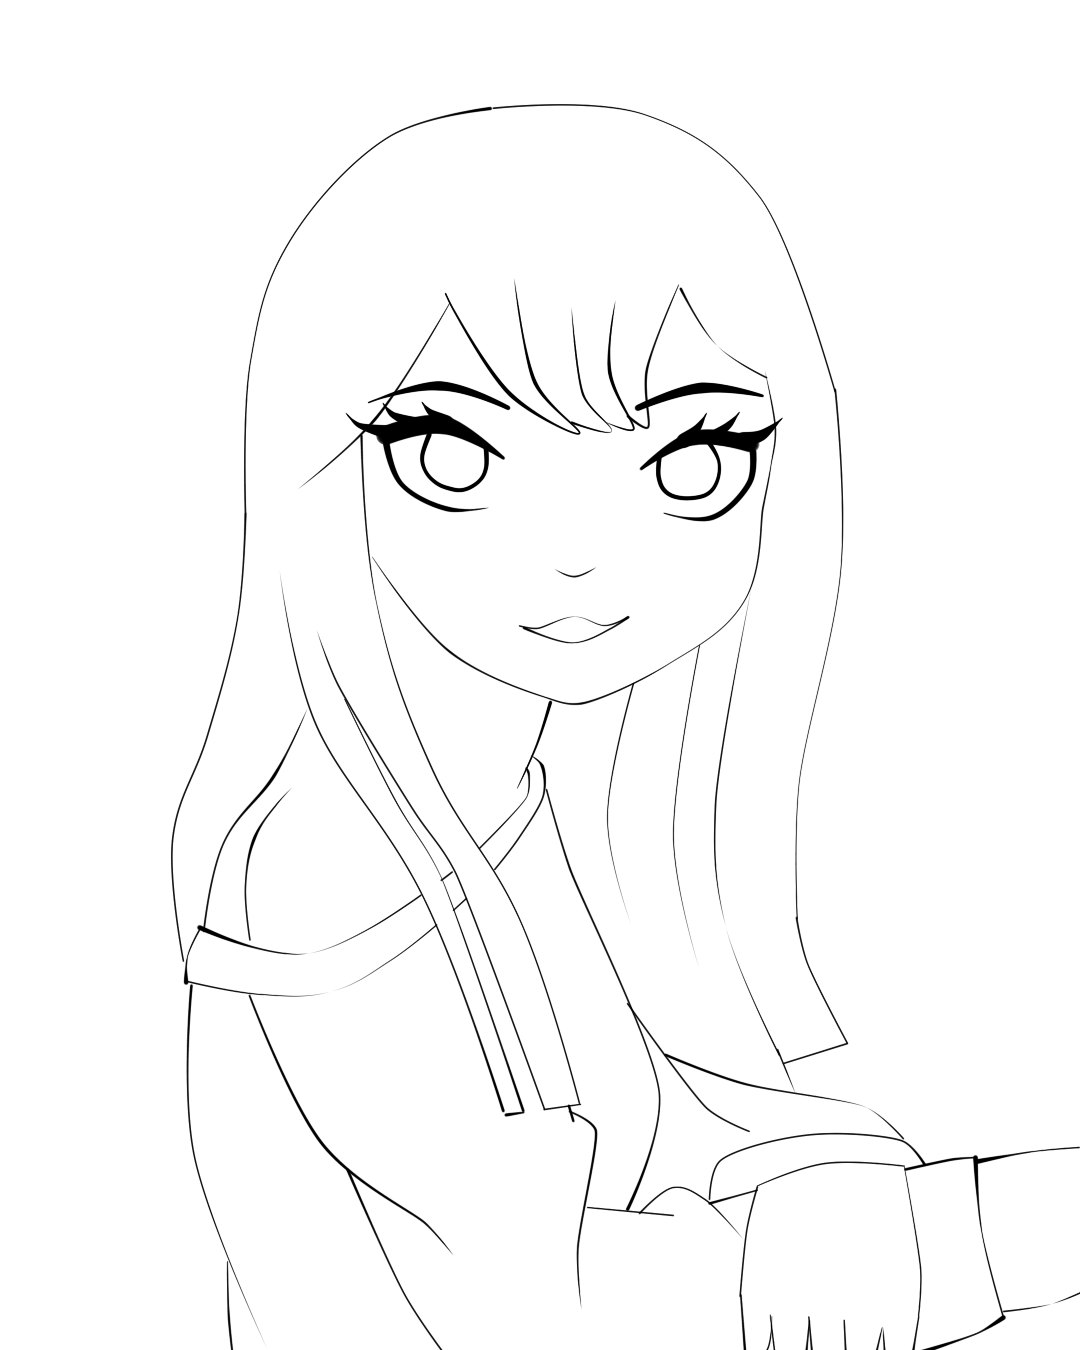 1 Lineart.png